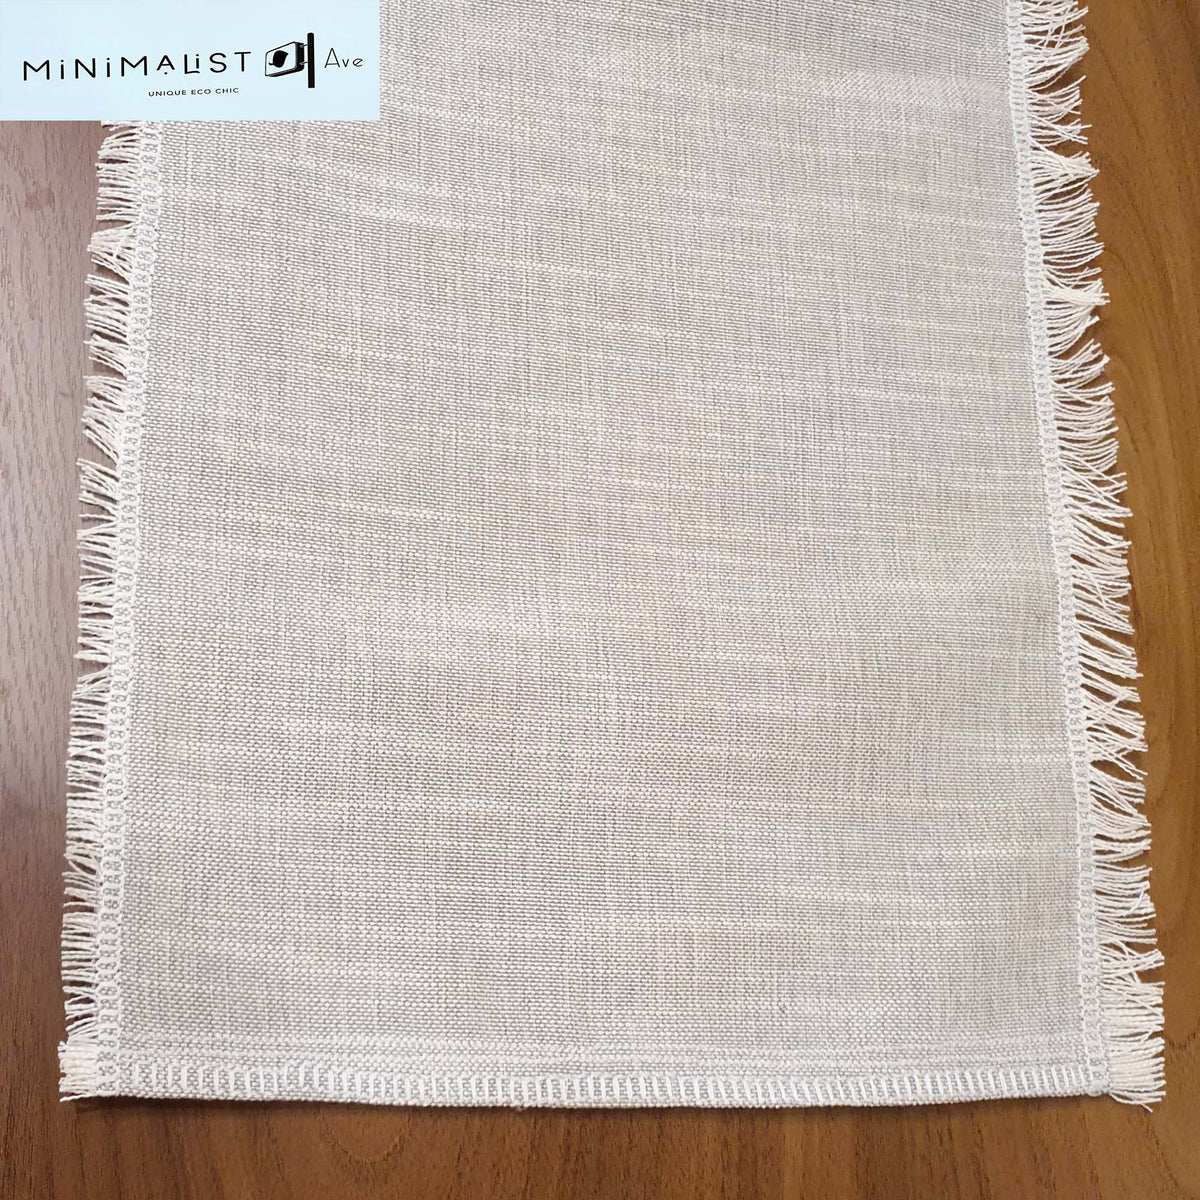 Table runner, greige, khaki, beige, sand, light taupe, decorative sides and small fringes, minimalistave, minimalist, minimalistave.com